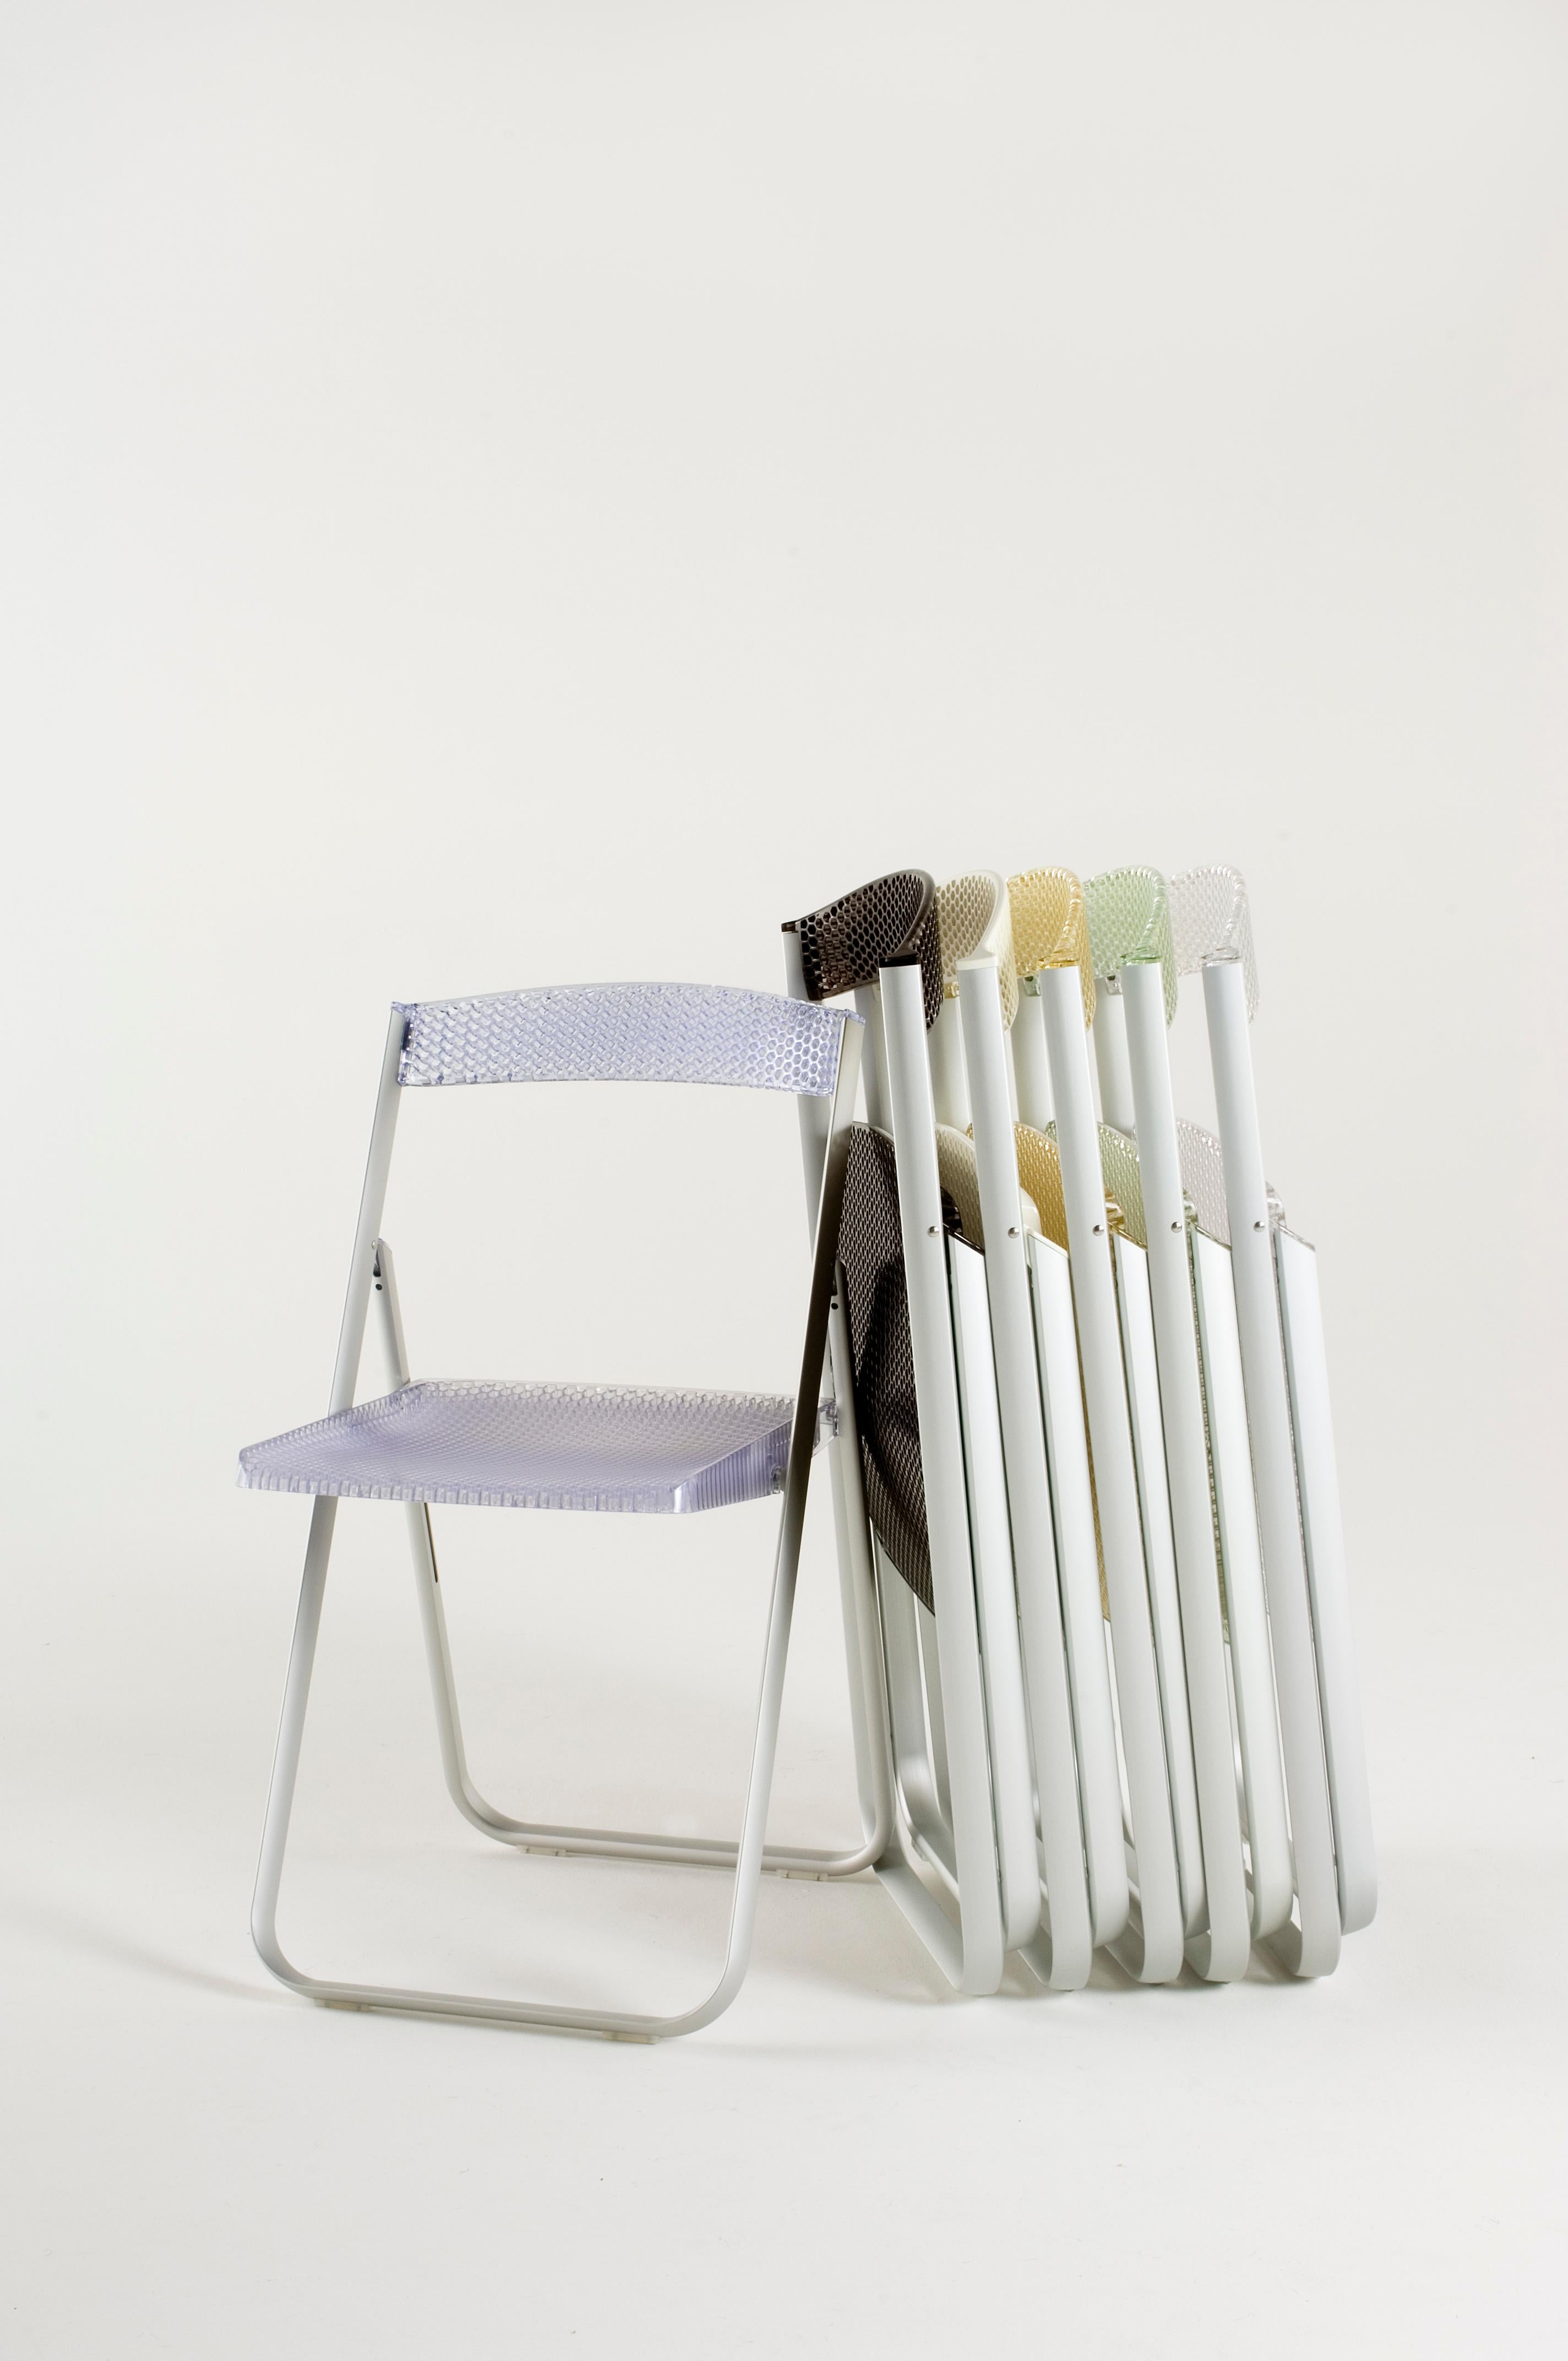 Contemporary Kartell Honeycomb Folding Chair in Light Blue by Alberto Media